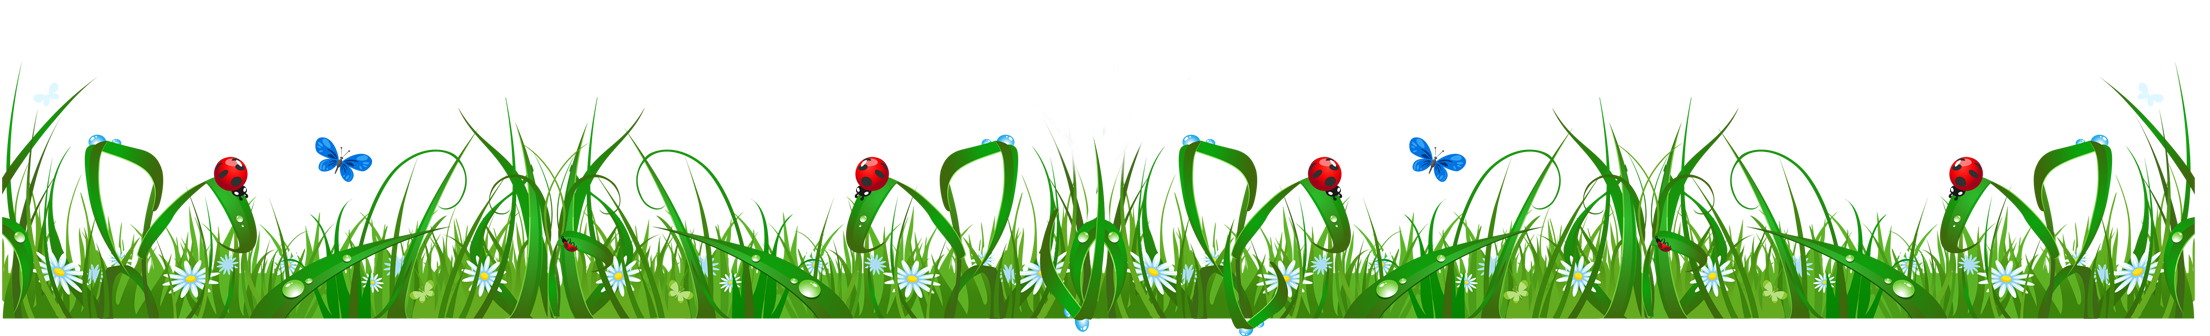 Pin by jeny chique. Grass clipart ladybug